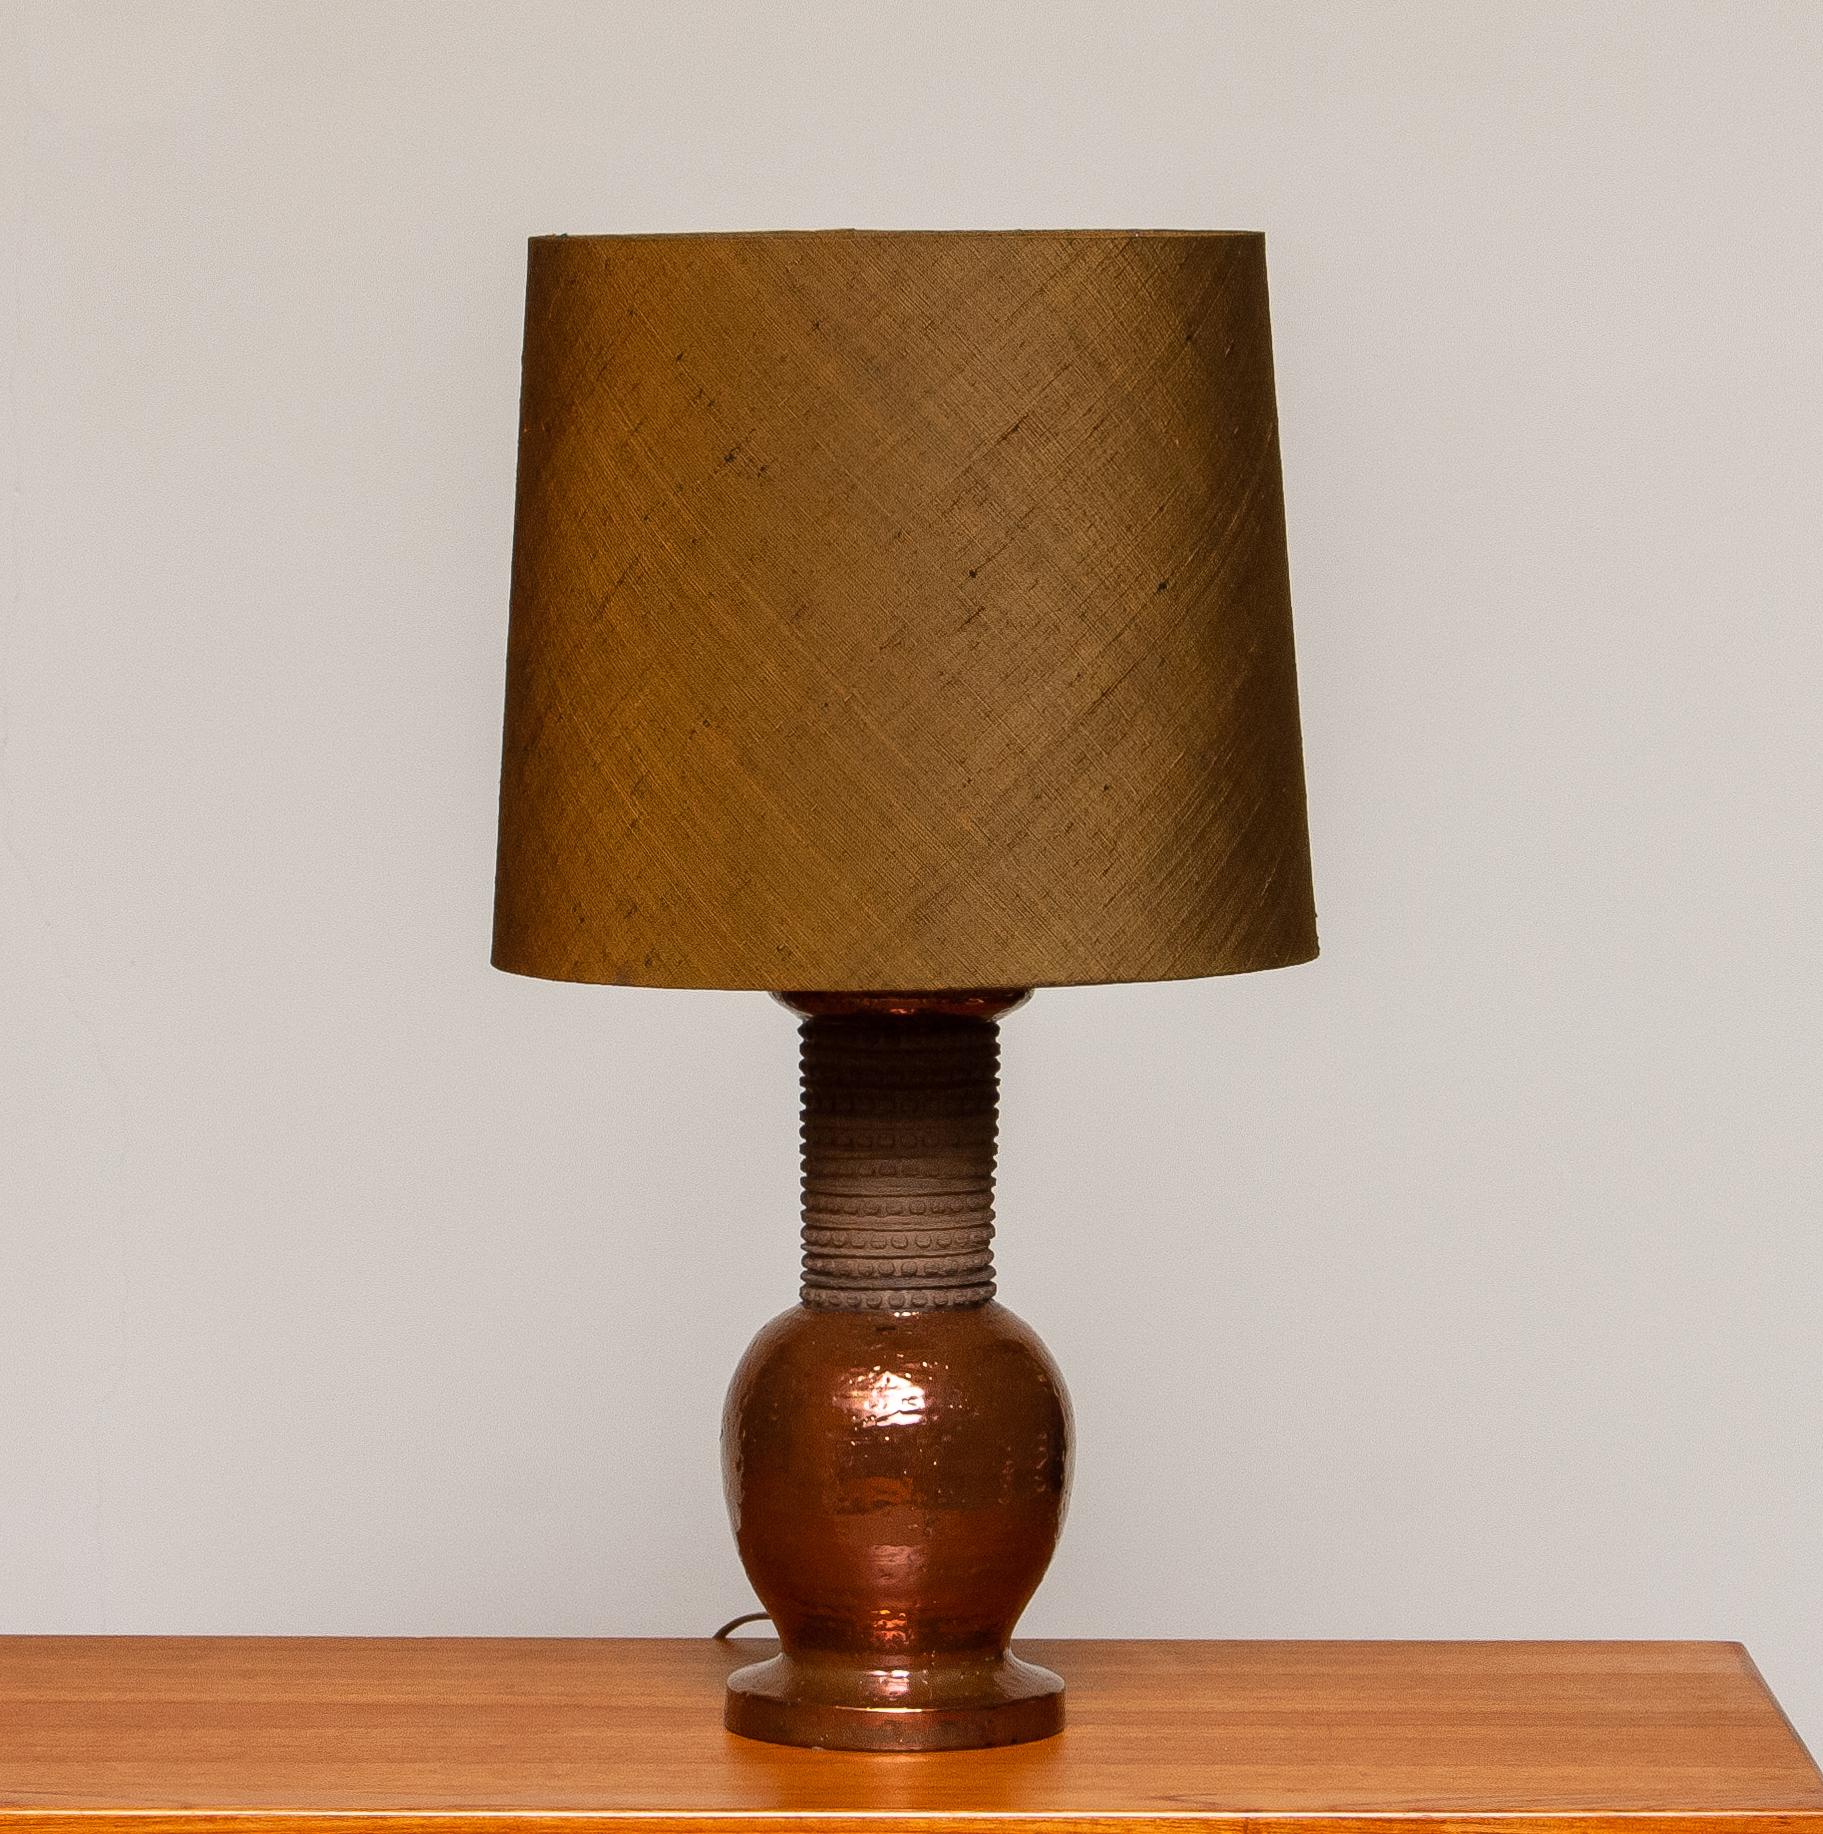 Beautiful with copper covered, ceramic table lamp made by Bitossi Italy in the 60's for Bergboms Sweden.
The lamp is in excellent condition and technically 100%. The fitting are for a screw bulb size E27 E28 and suit 110 and 230 volts.
The shade